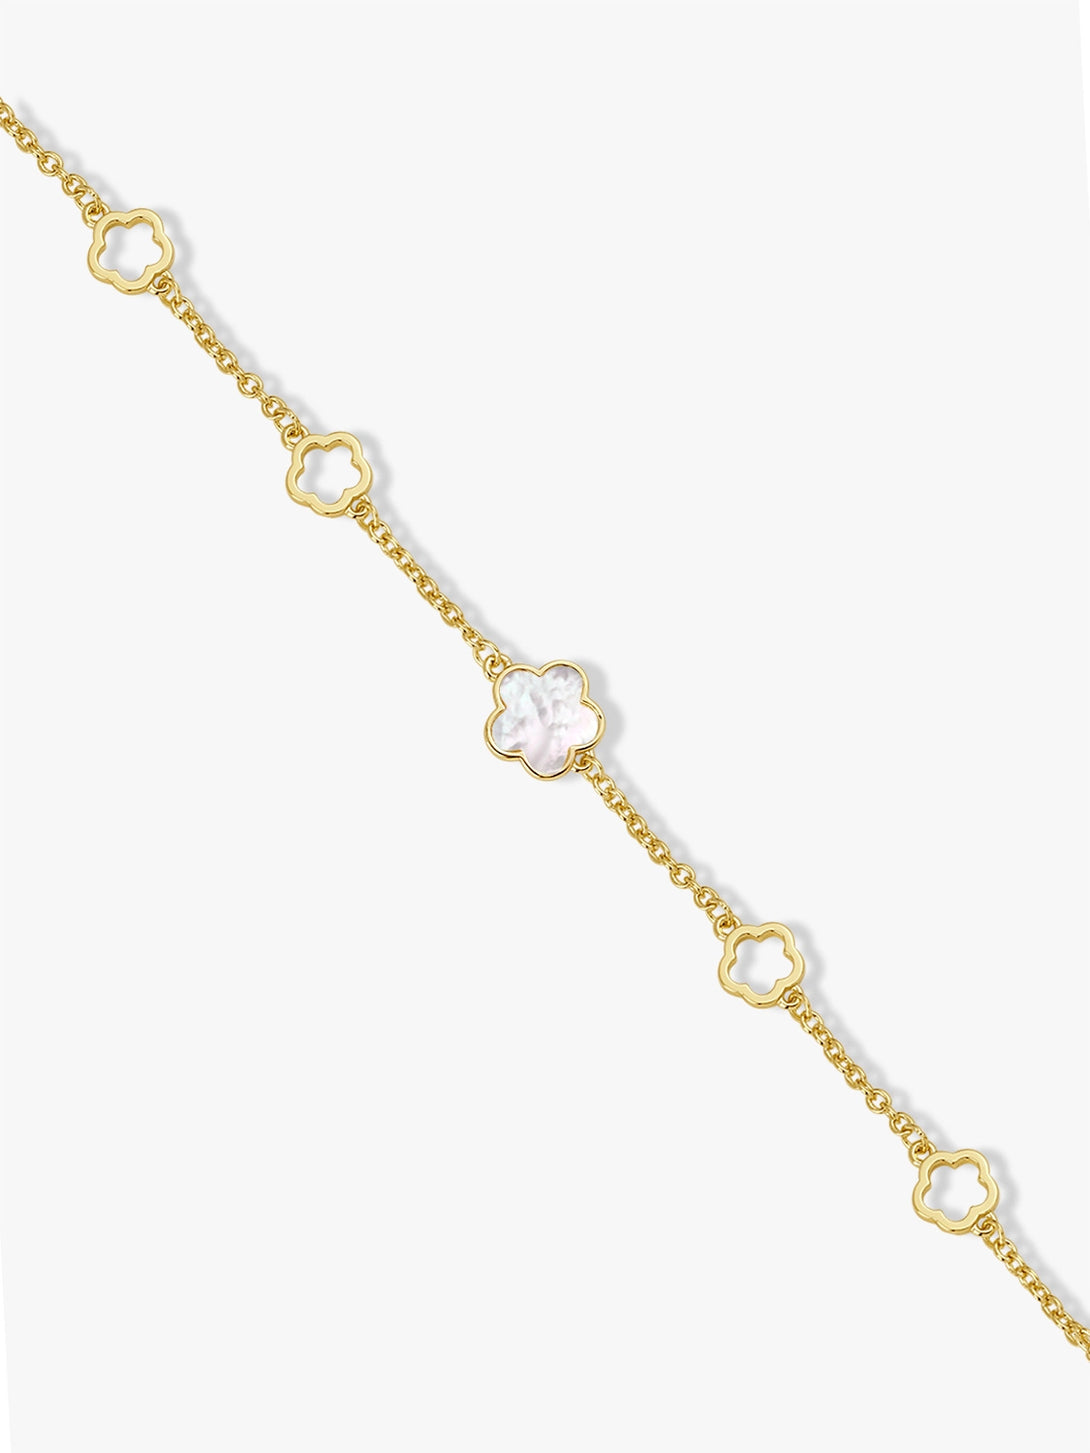 Cute Mother Of Pearl Flower Station Bracelet - OOTDY